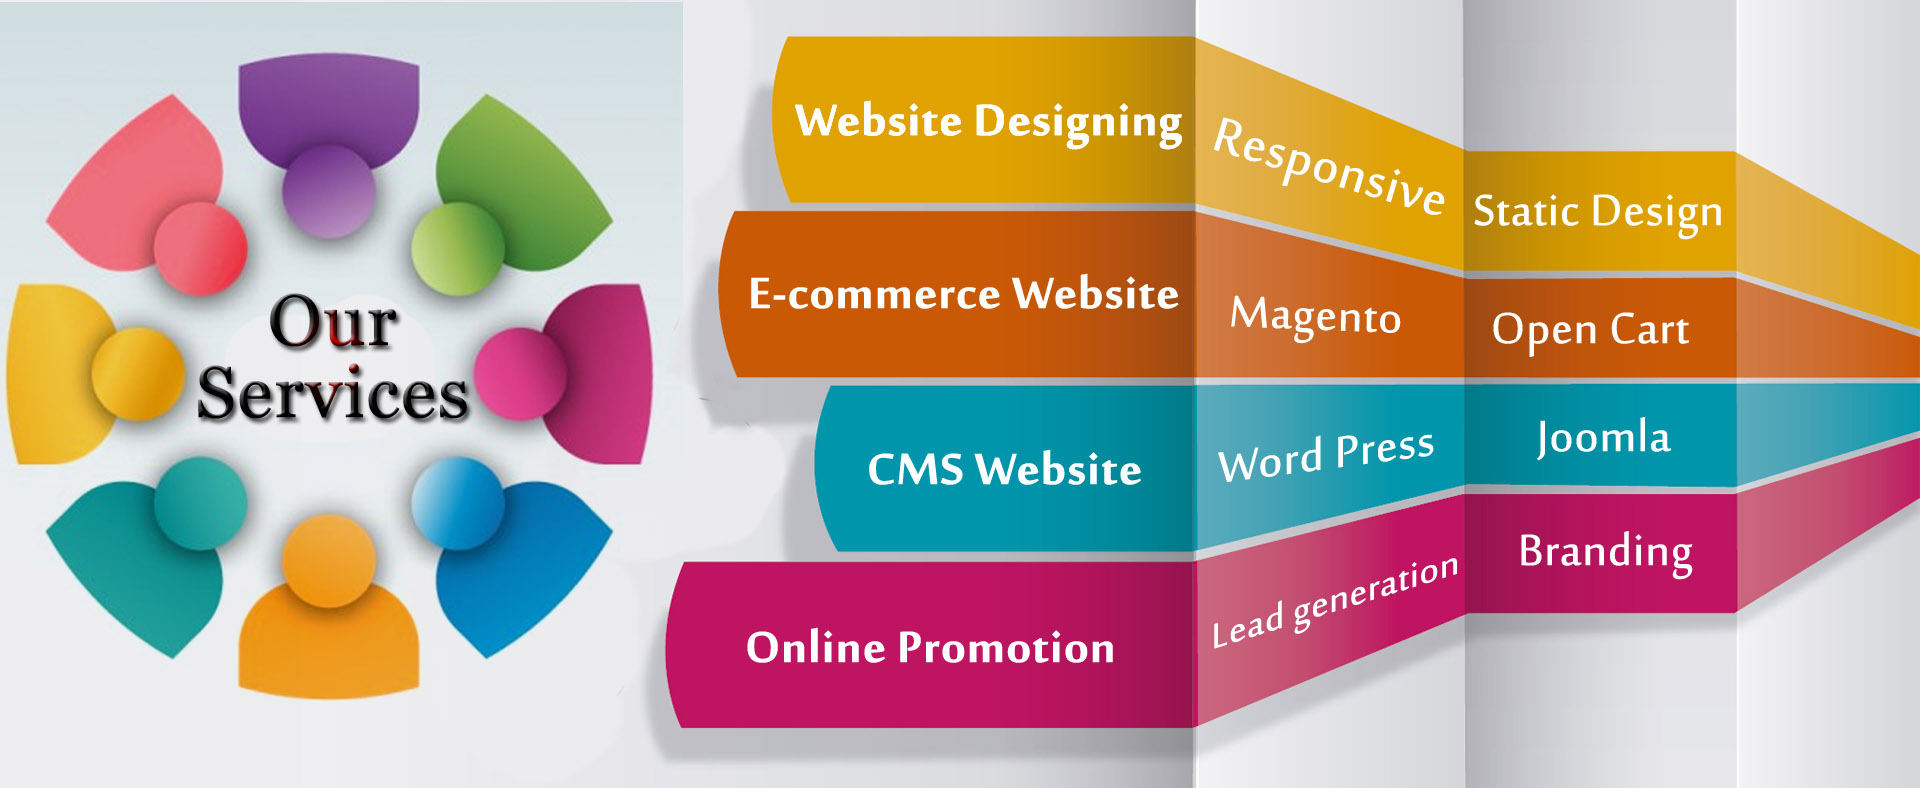 You are currently viewing Design the perfect website for your business with our web design services in Dubai.